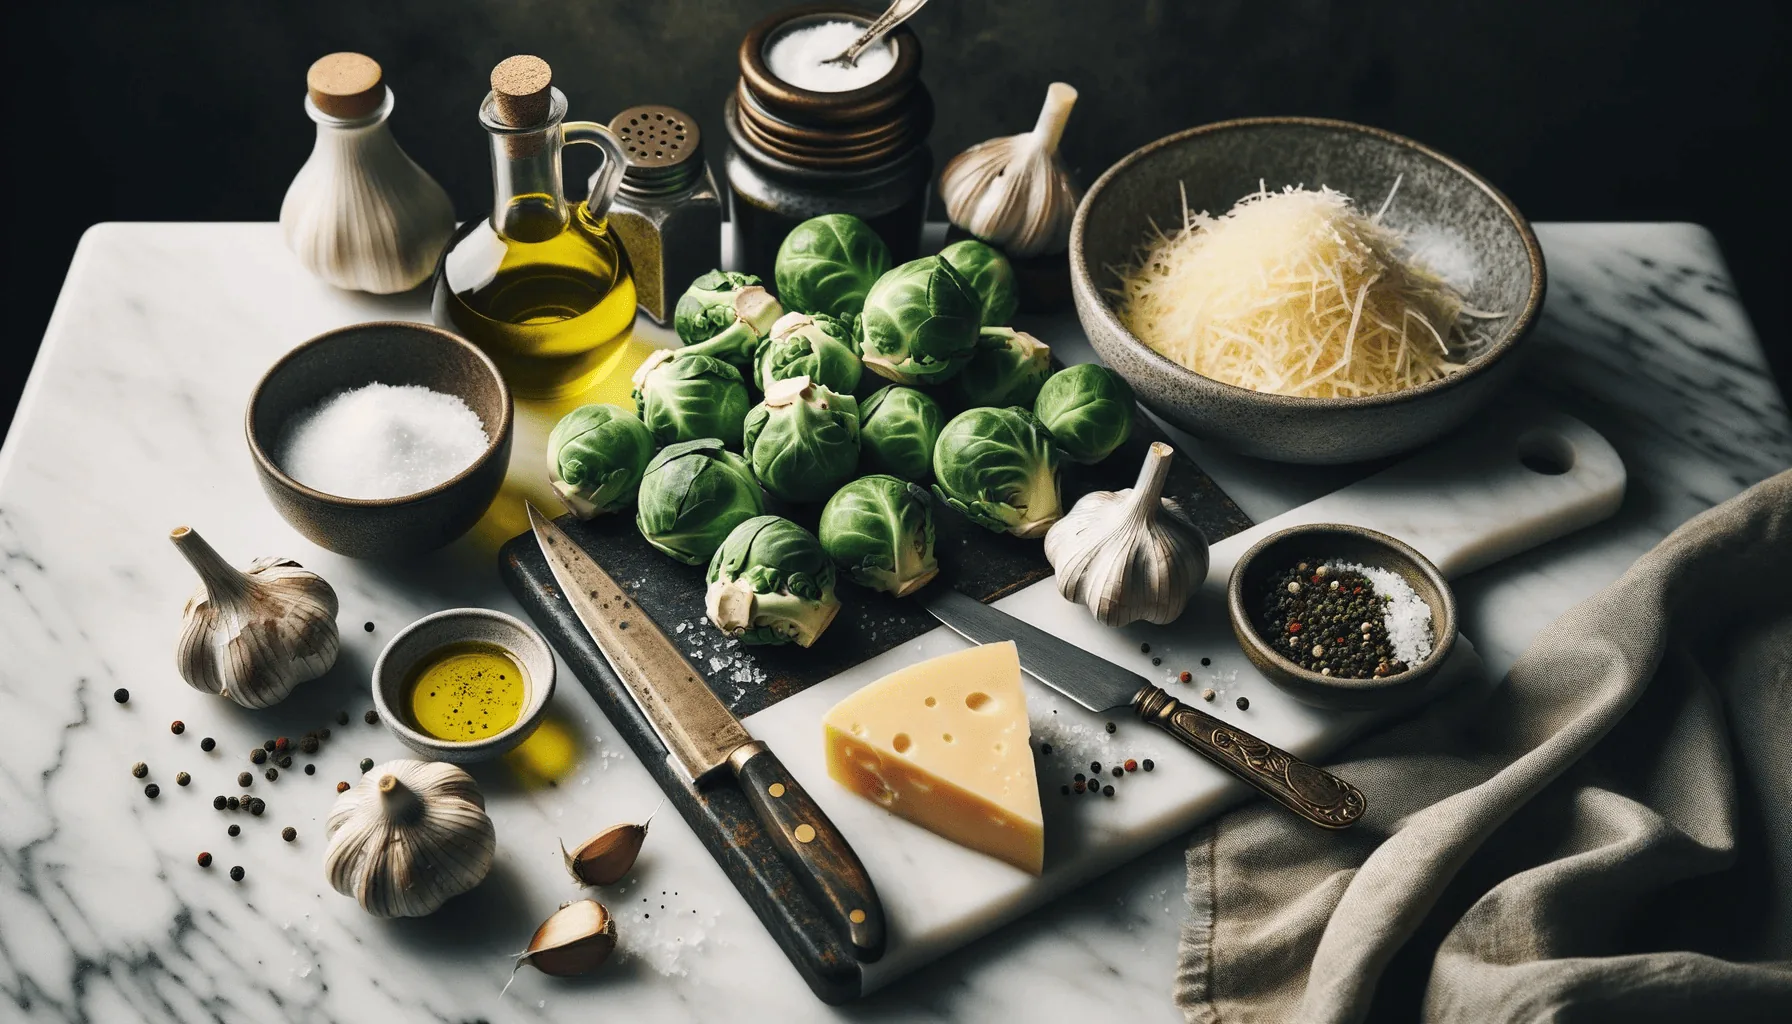 The ingredients for my oven-roasted Brussels sprouts recipe